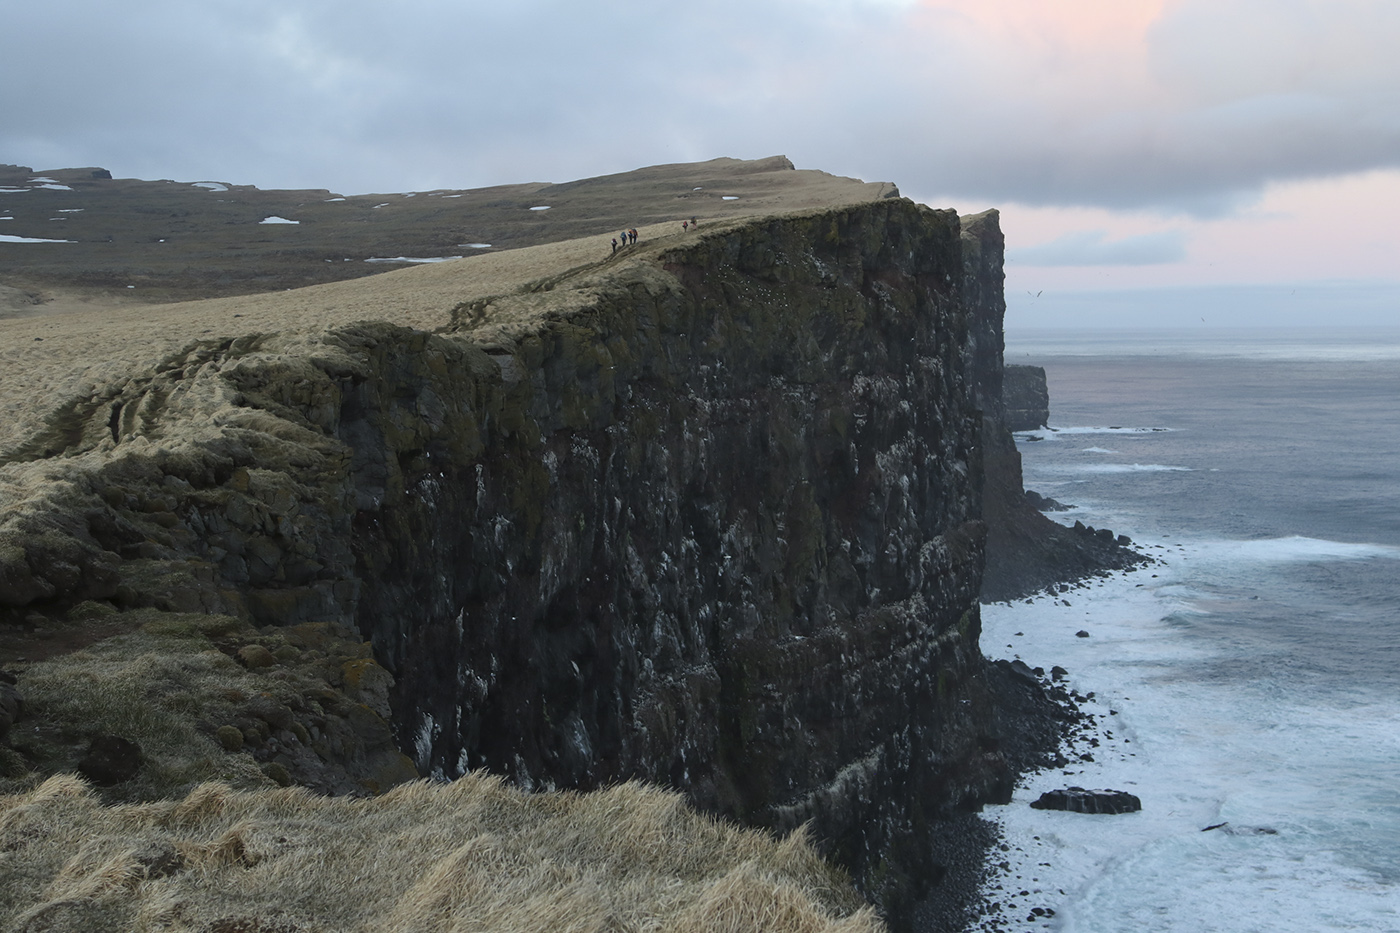 A small group of hikers walk on the edge of tall sea cliffs at arctic midnight.